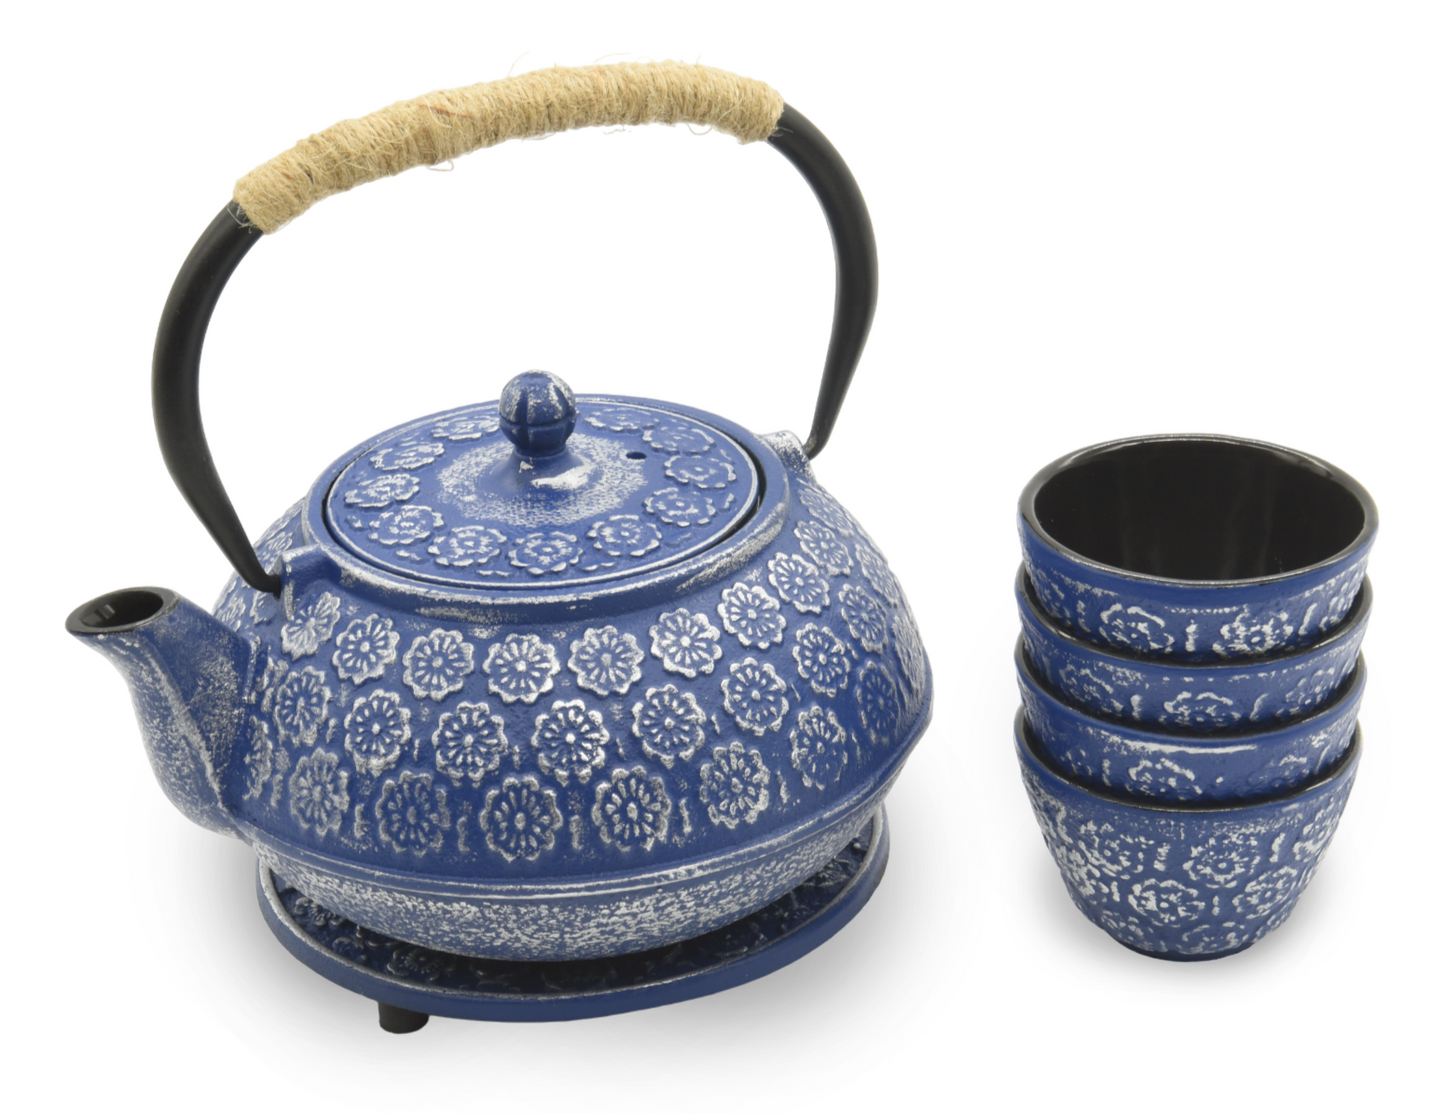 1.0 Liter Enamel Coated Cast Iron Sakura Blossom Teapot Set with 4 Cups and Stand (Blue)